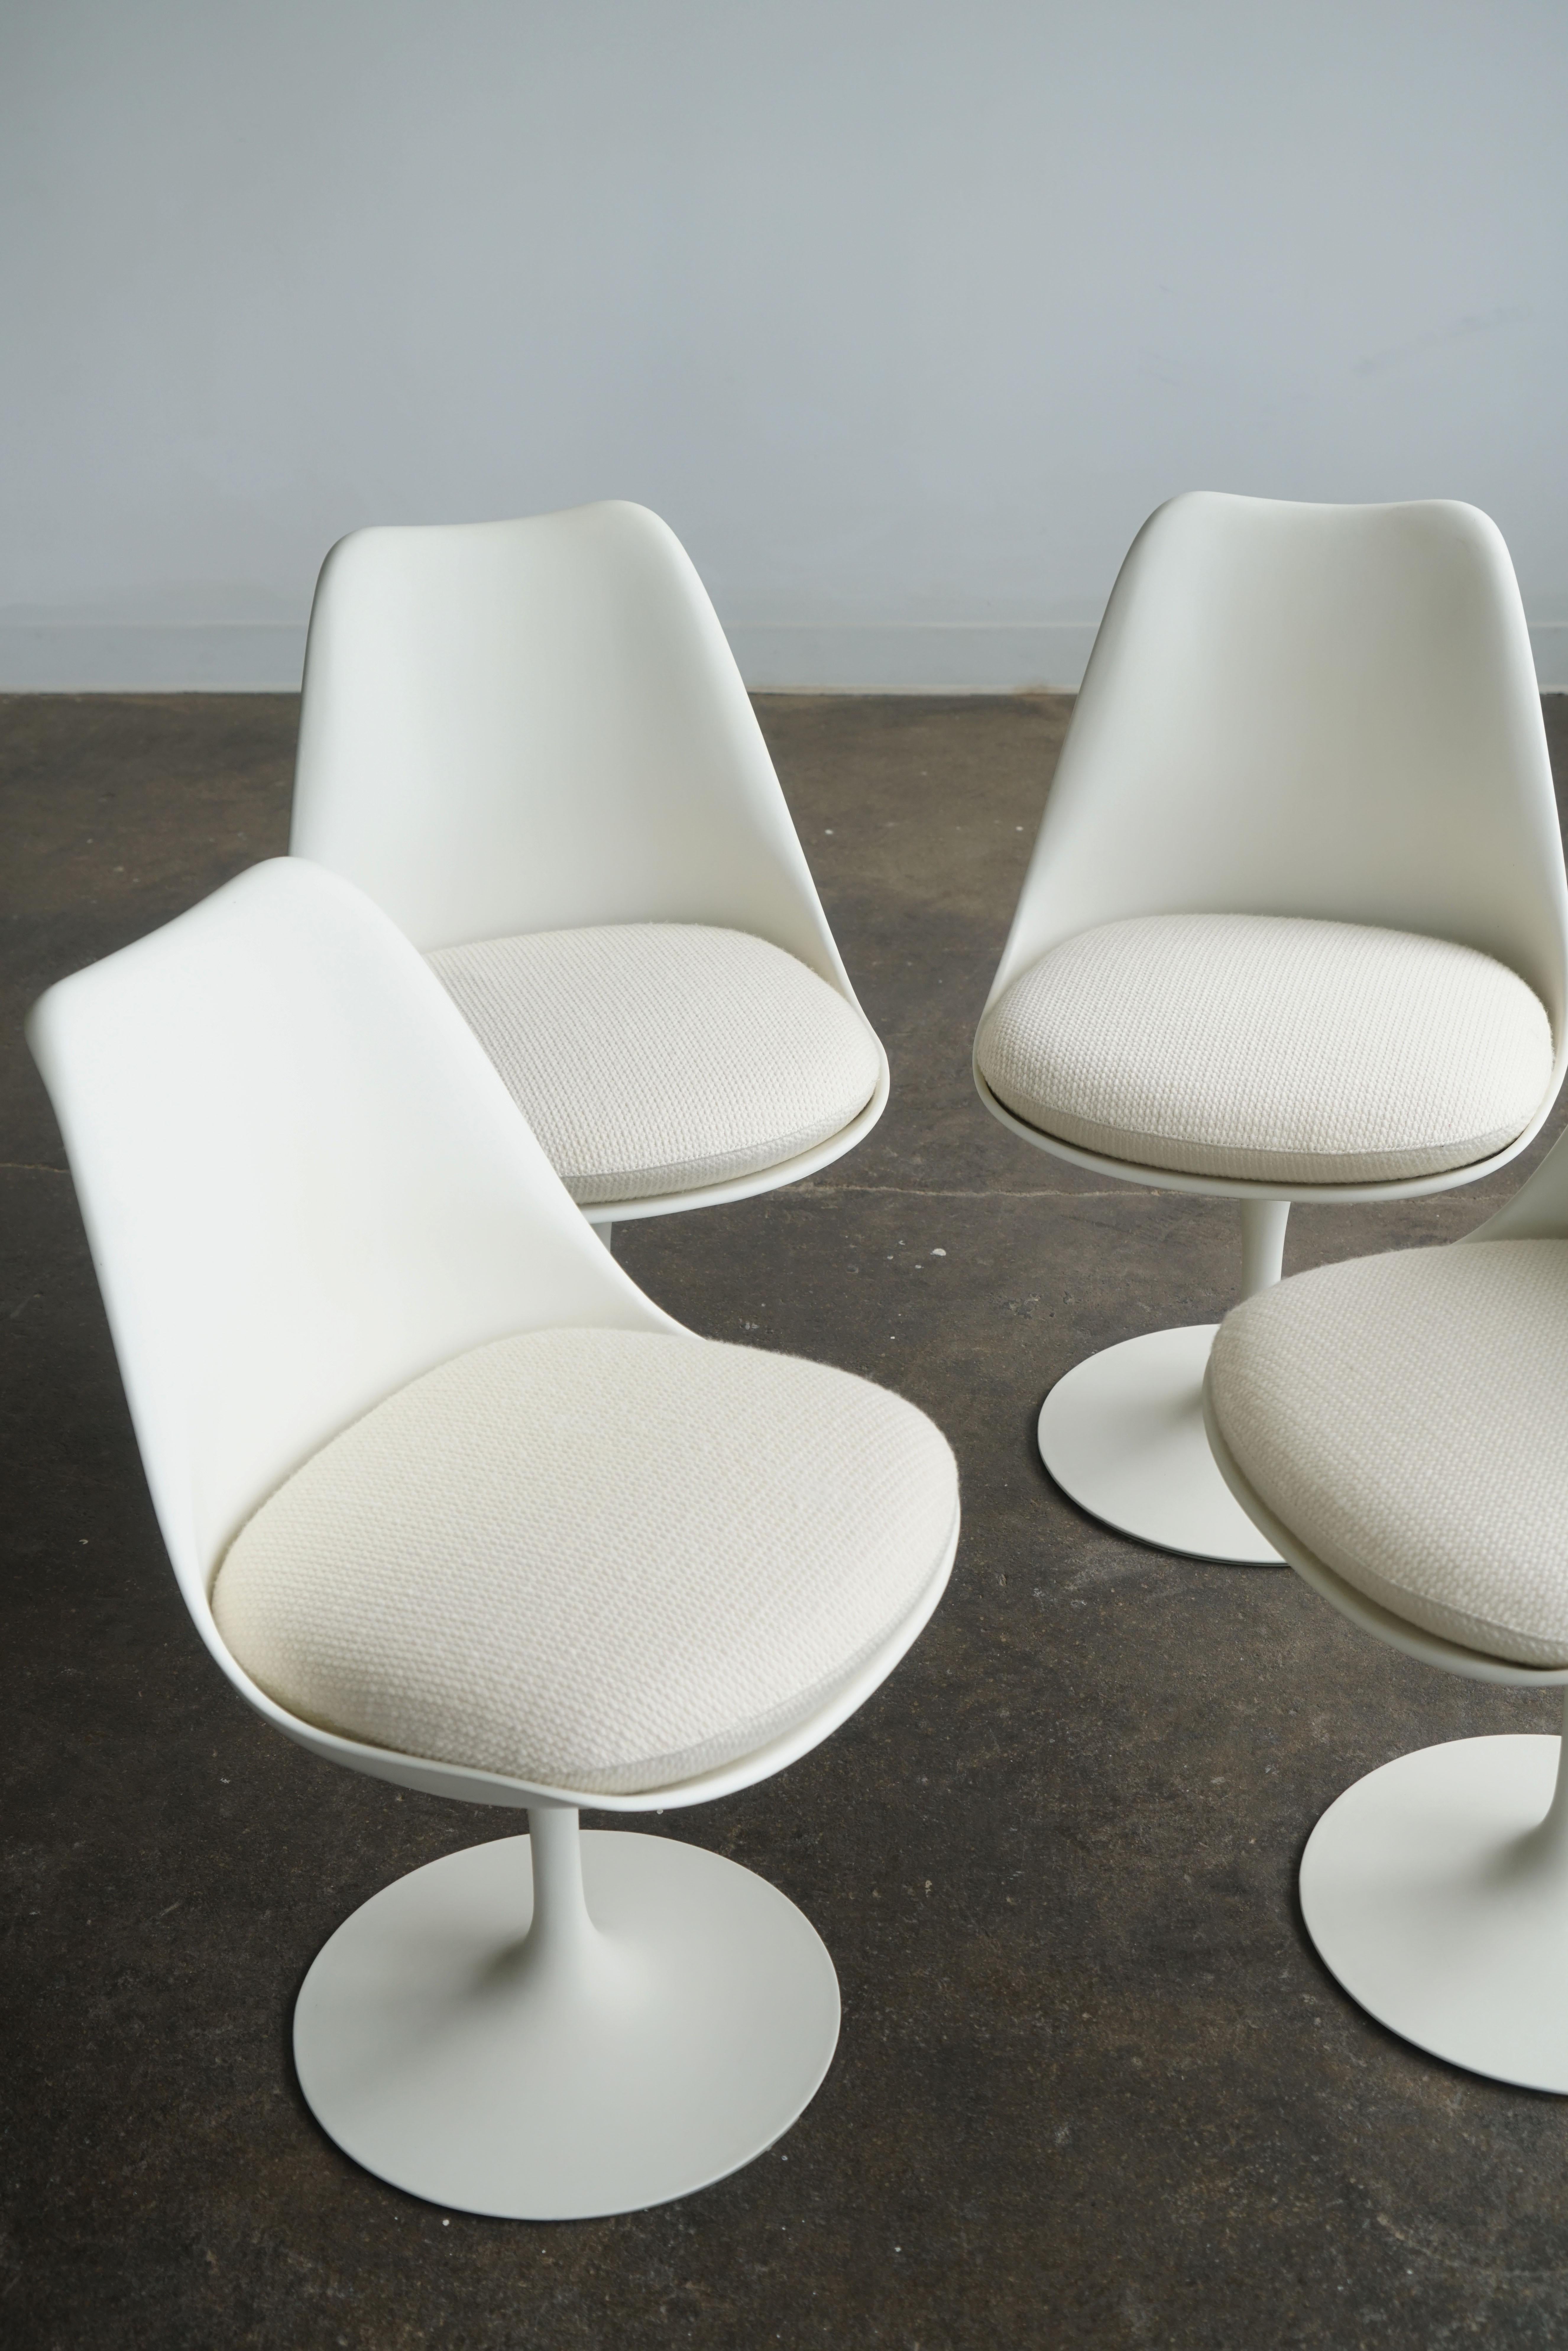 American 1960's Eero Saarinen Tulip dining chairs for Knoll, set of 4 upholstered For Sale